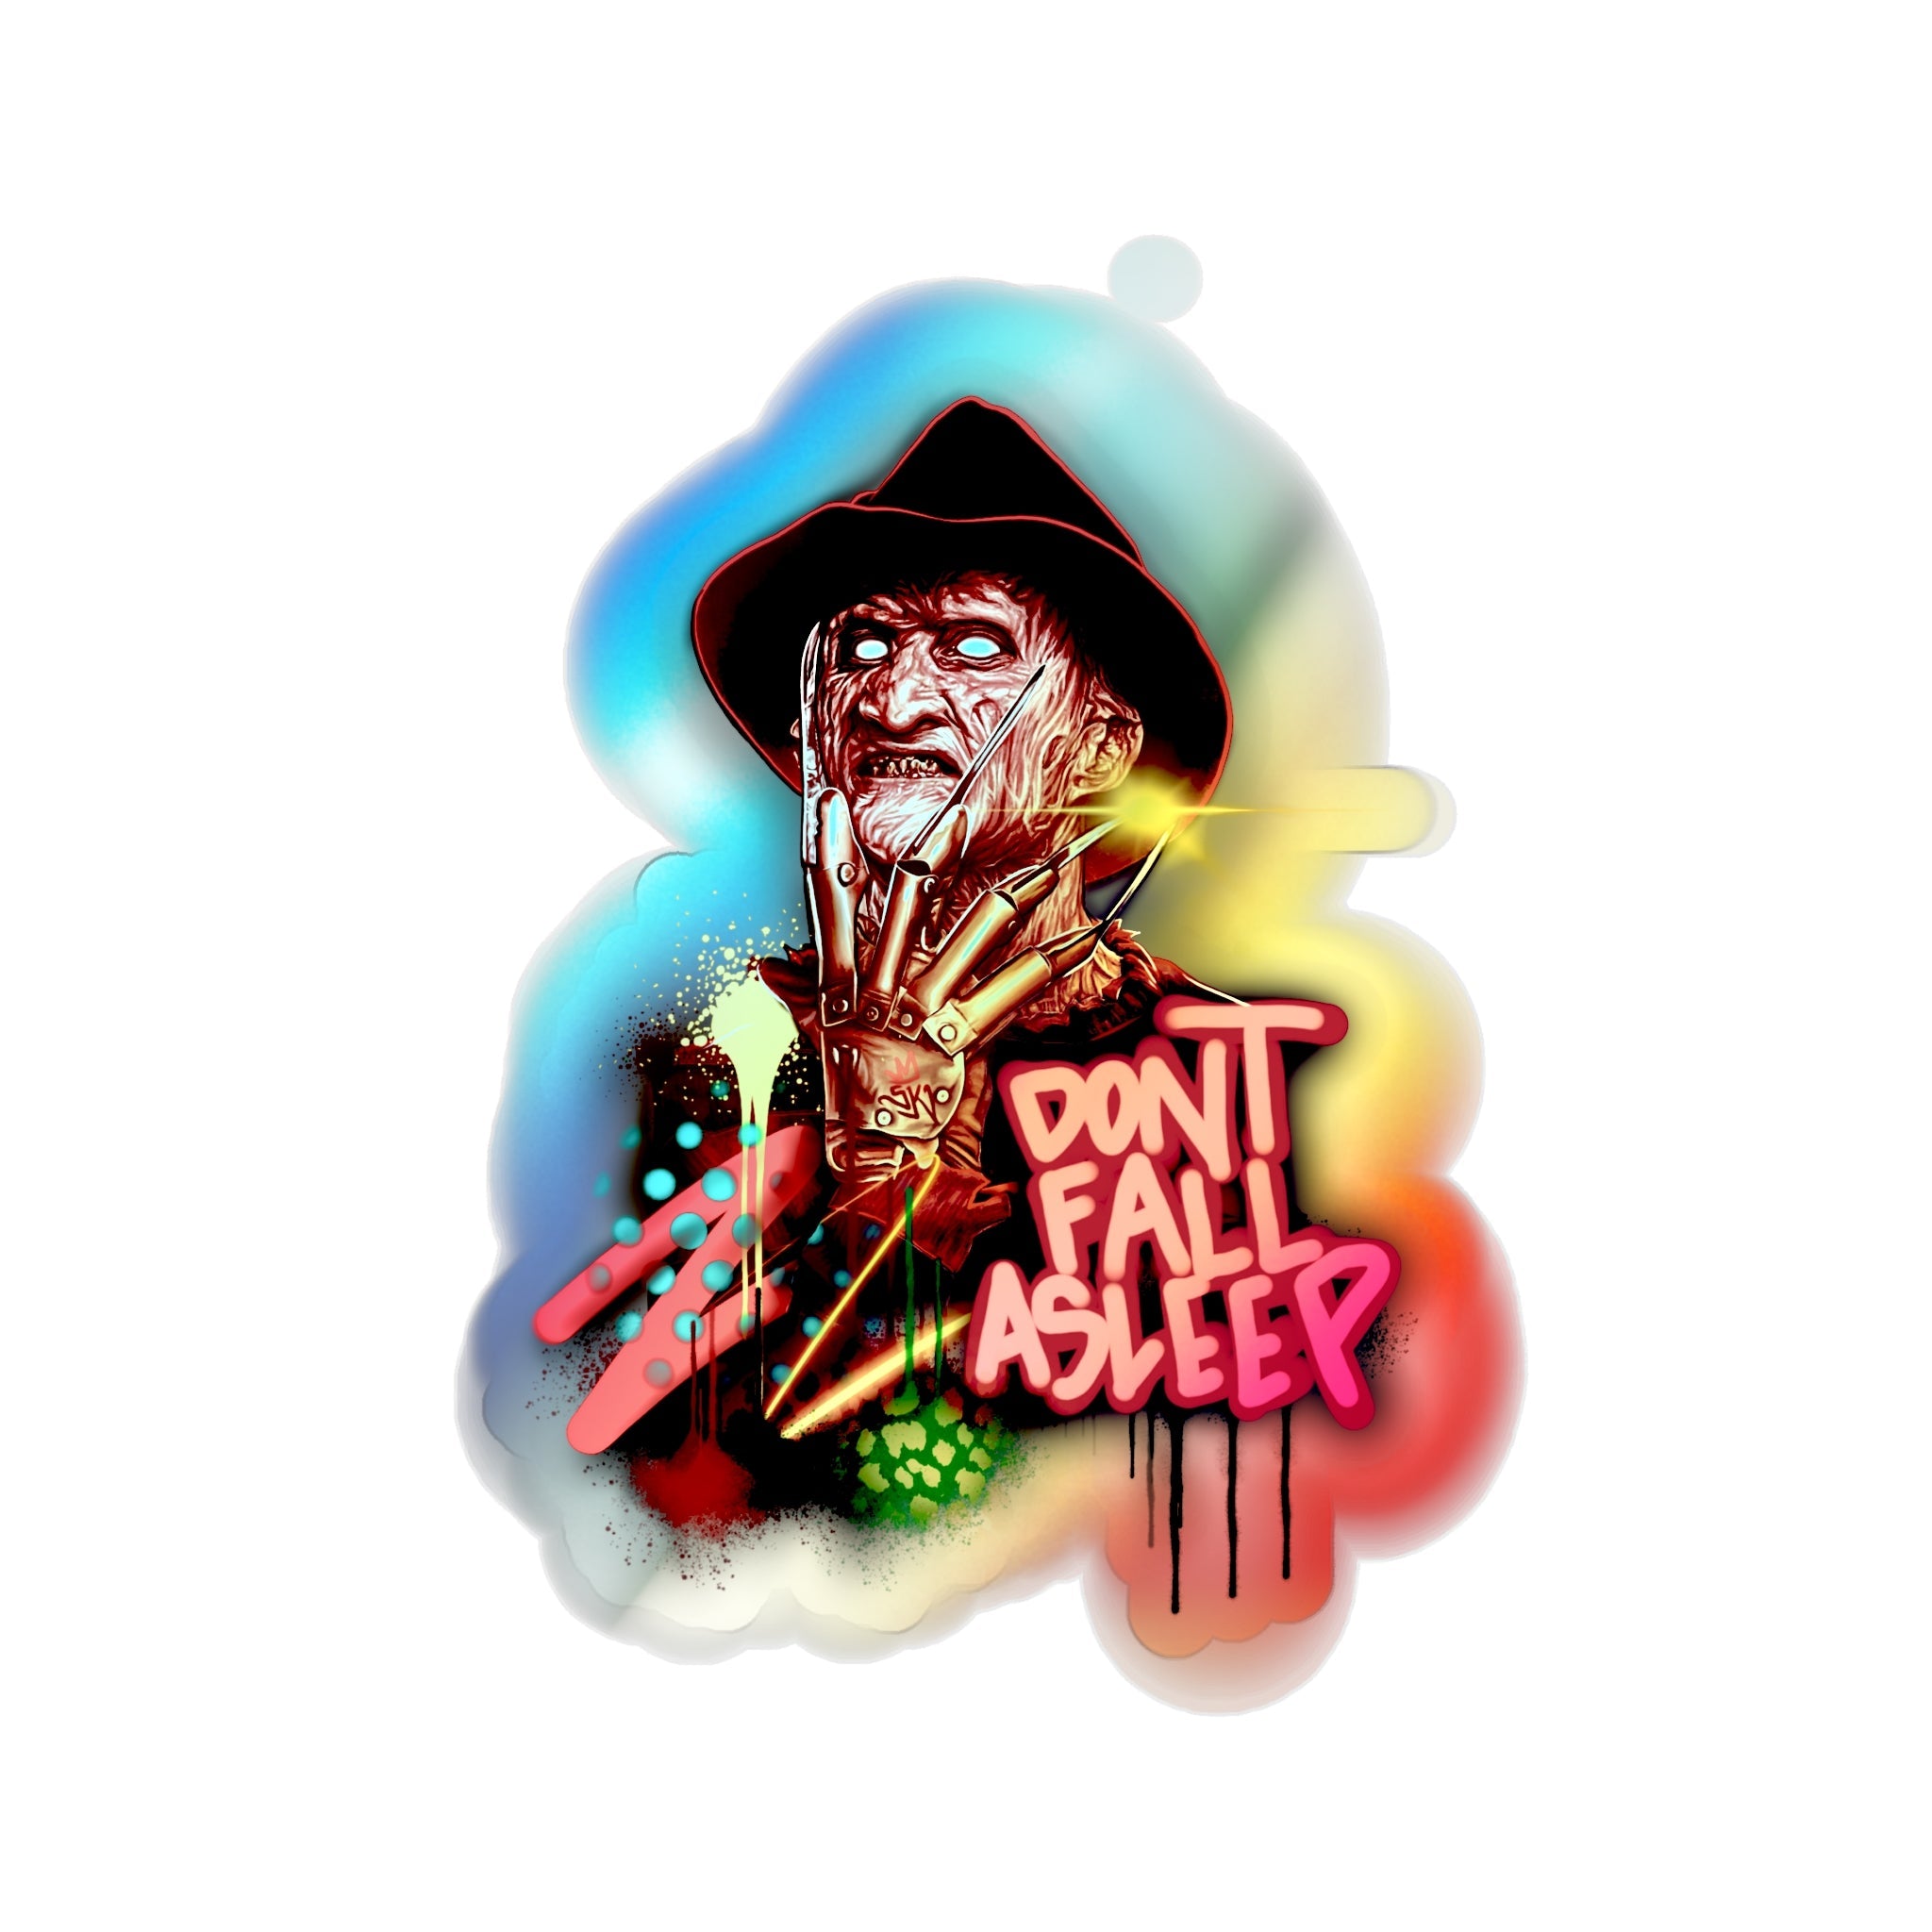 DONT FALL ASLEEP Holographic Die-cut Stickers - Sean Keith Art